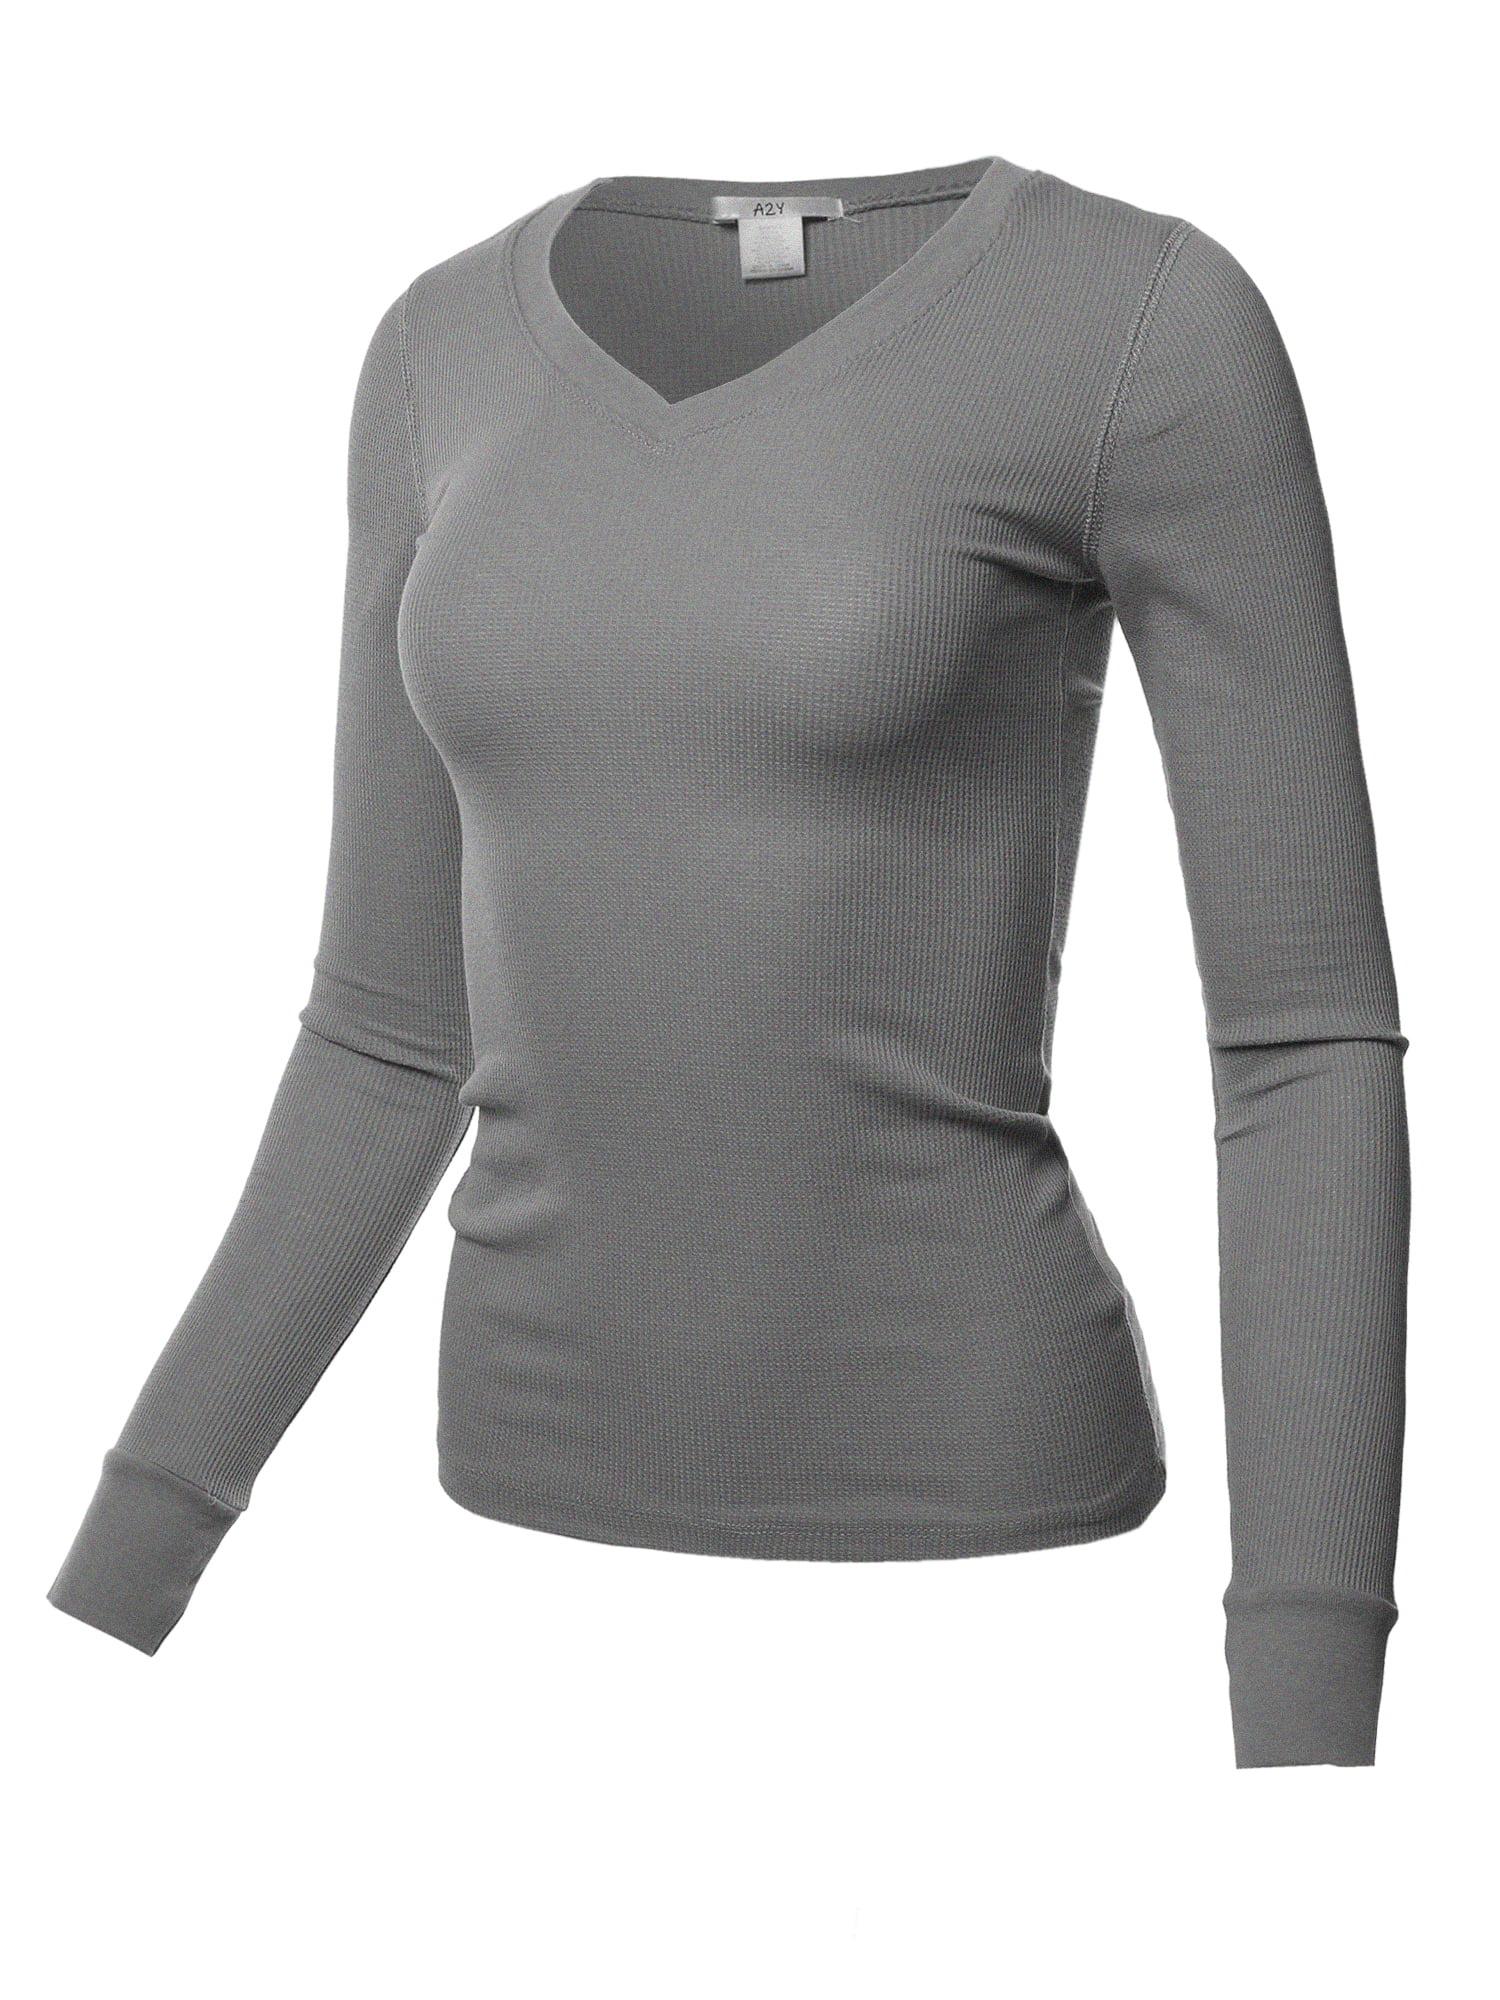 A2Y Women's Basic Solid Fitted Long Sleeve V-Neck Thermal Top Shirt Mid ...